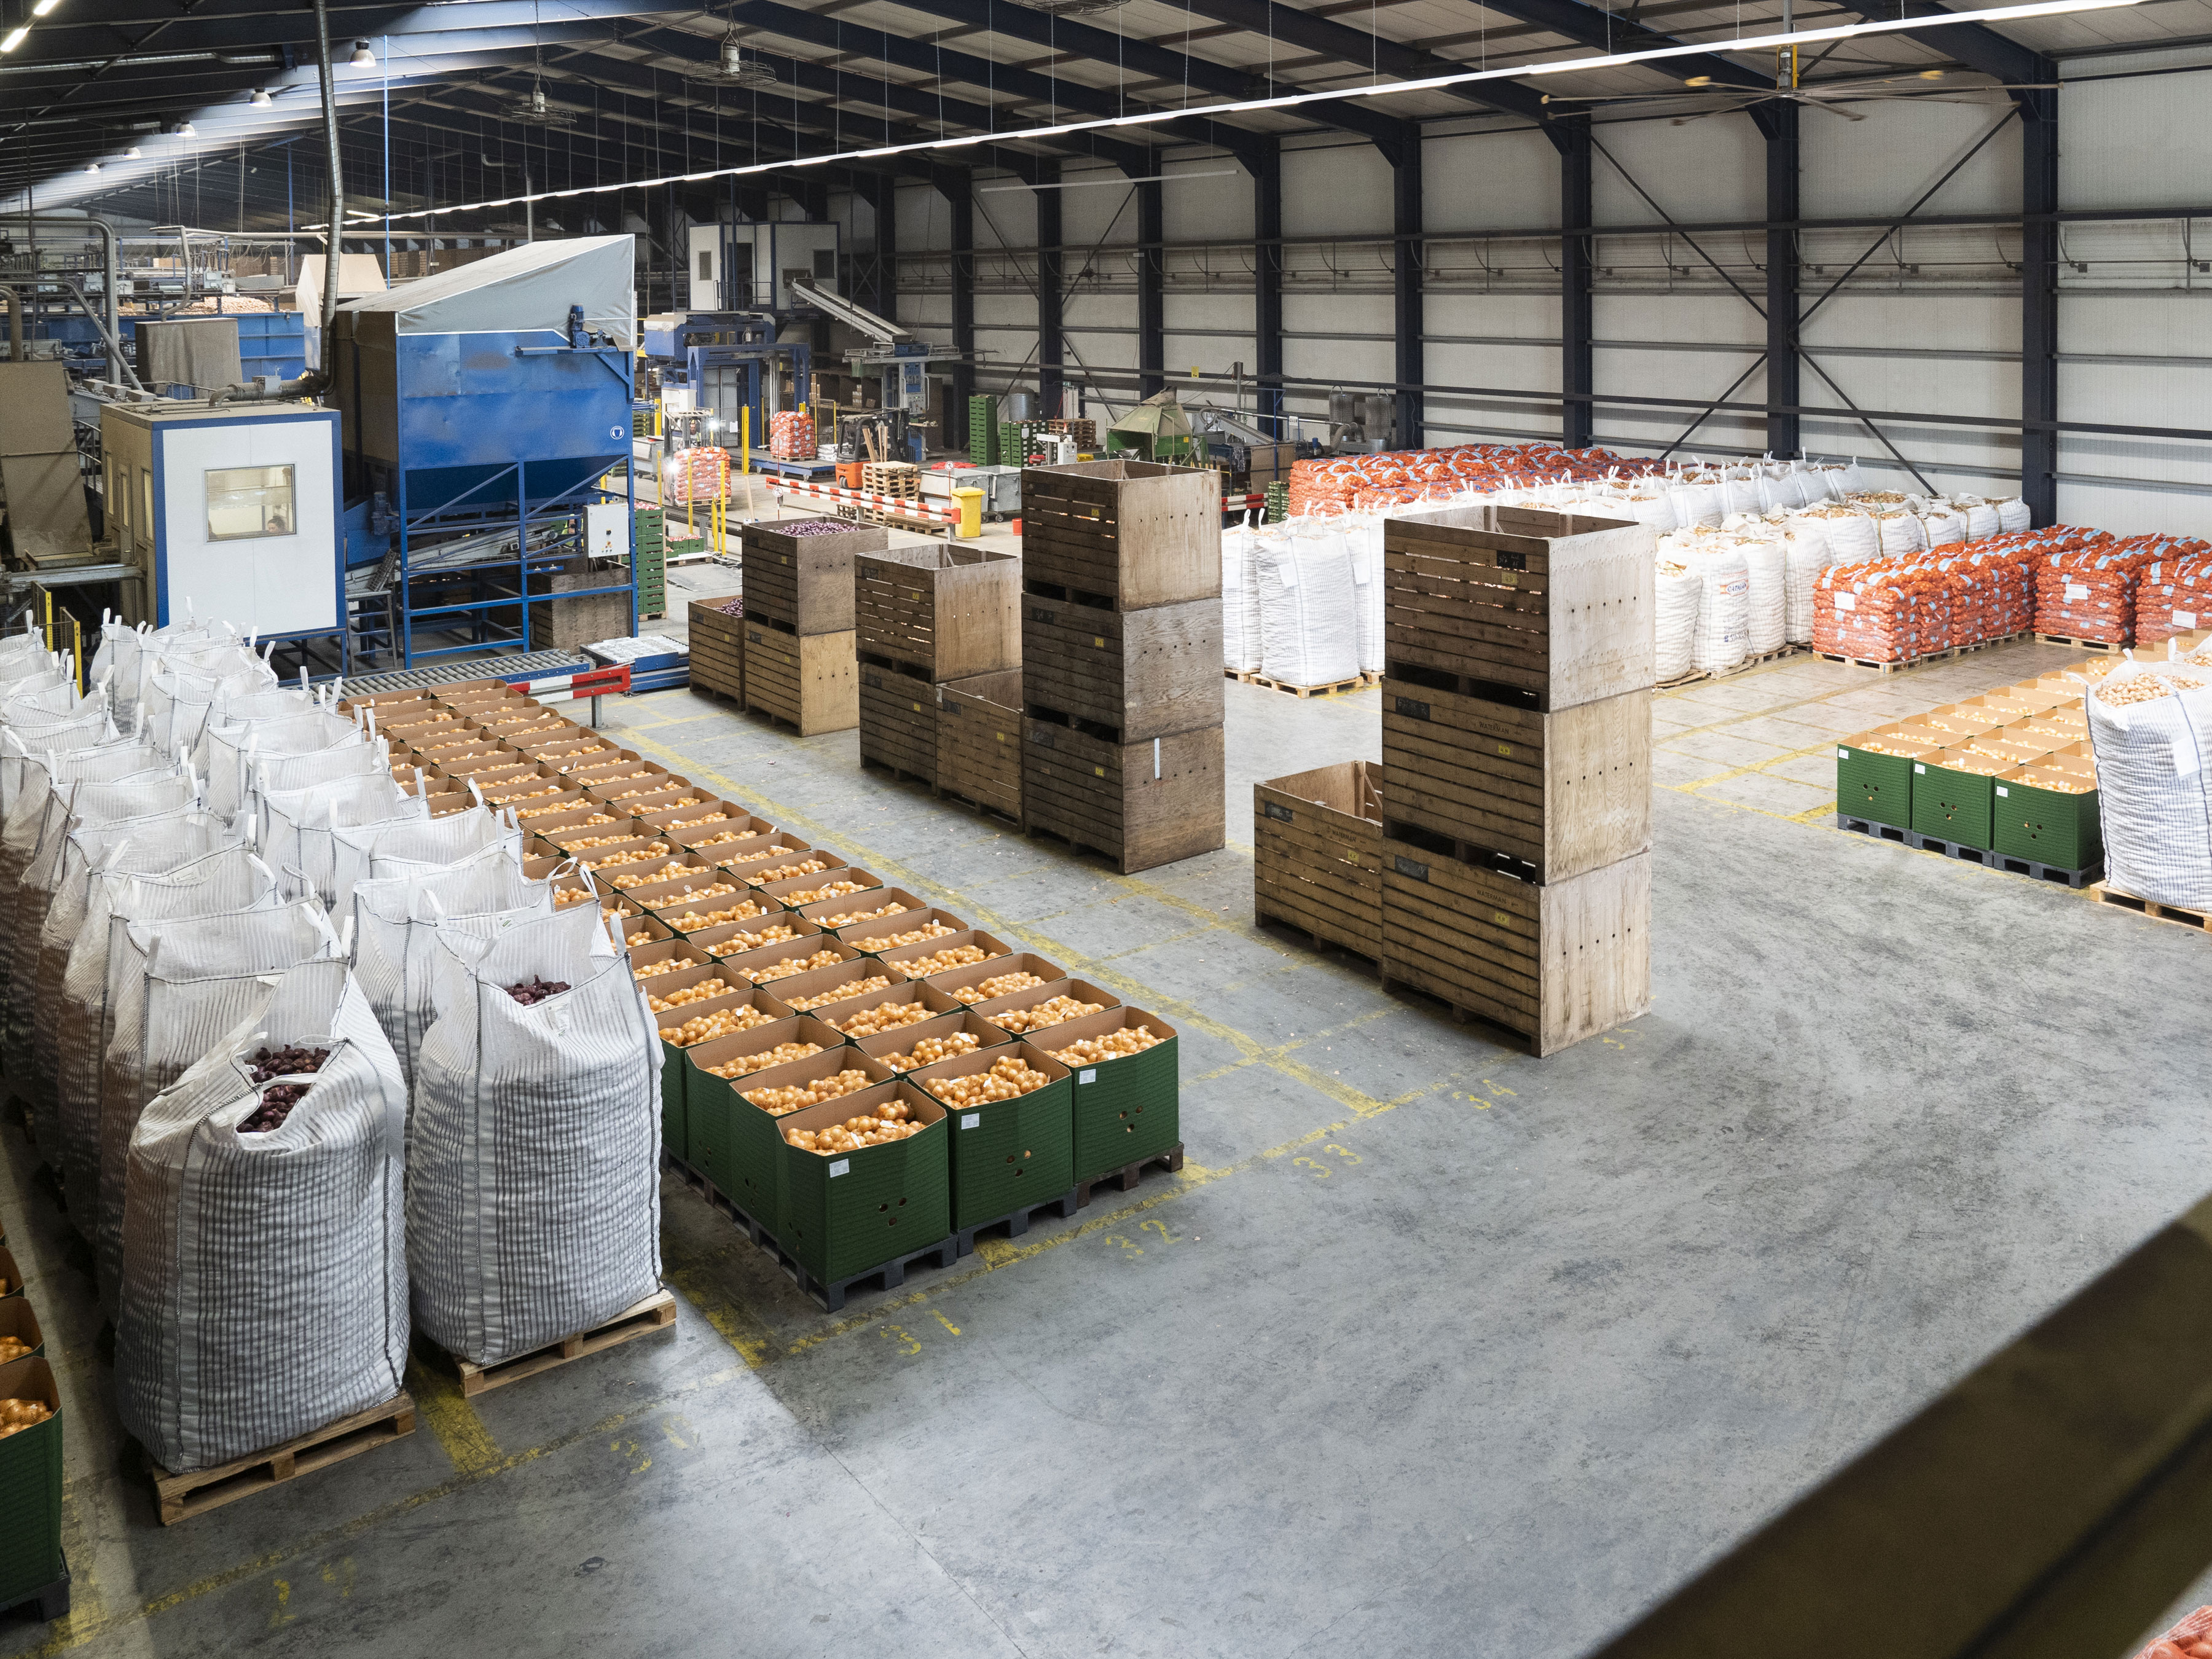 Boxes full of onions at Waterman Onions warehouse